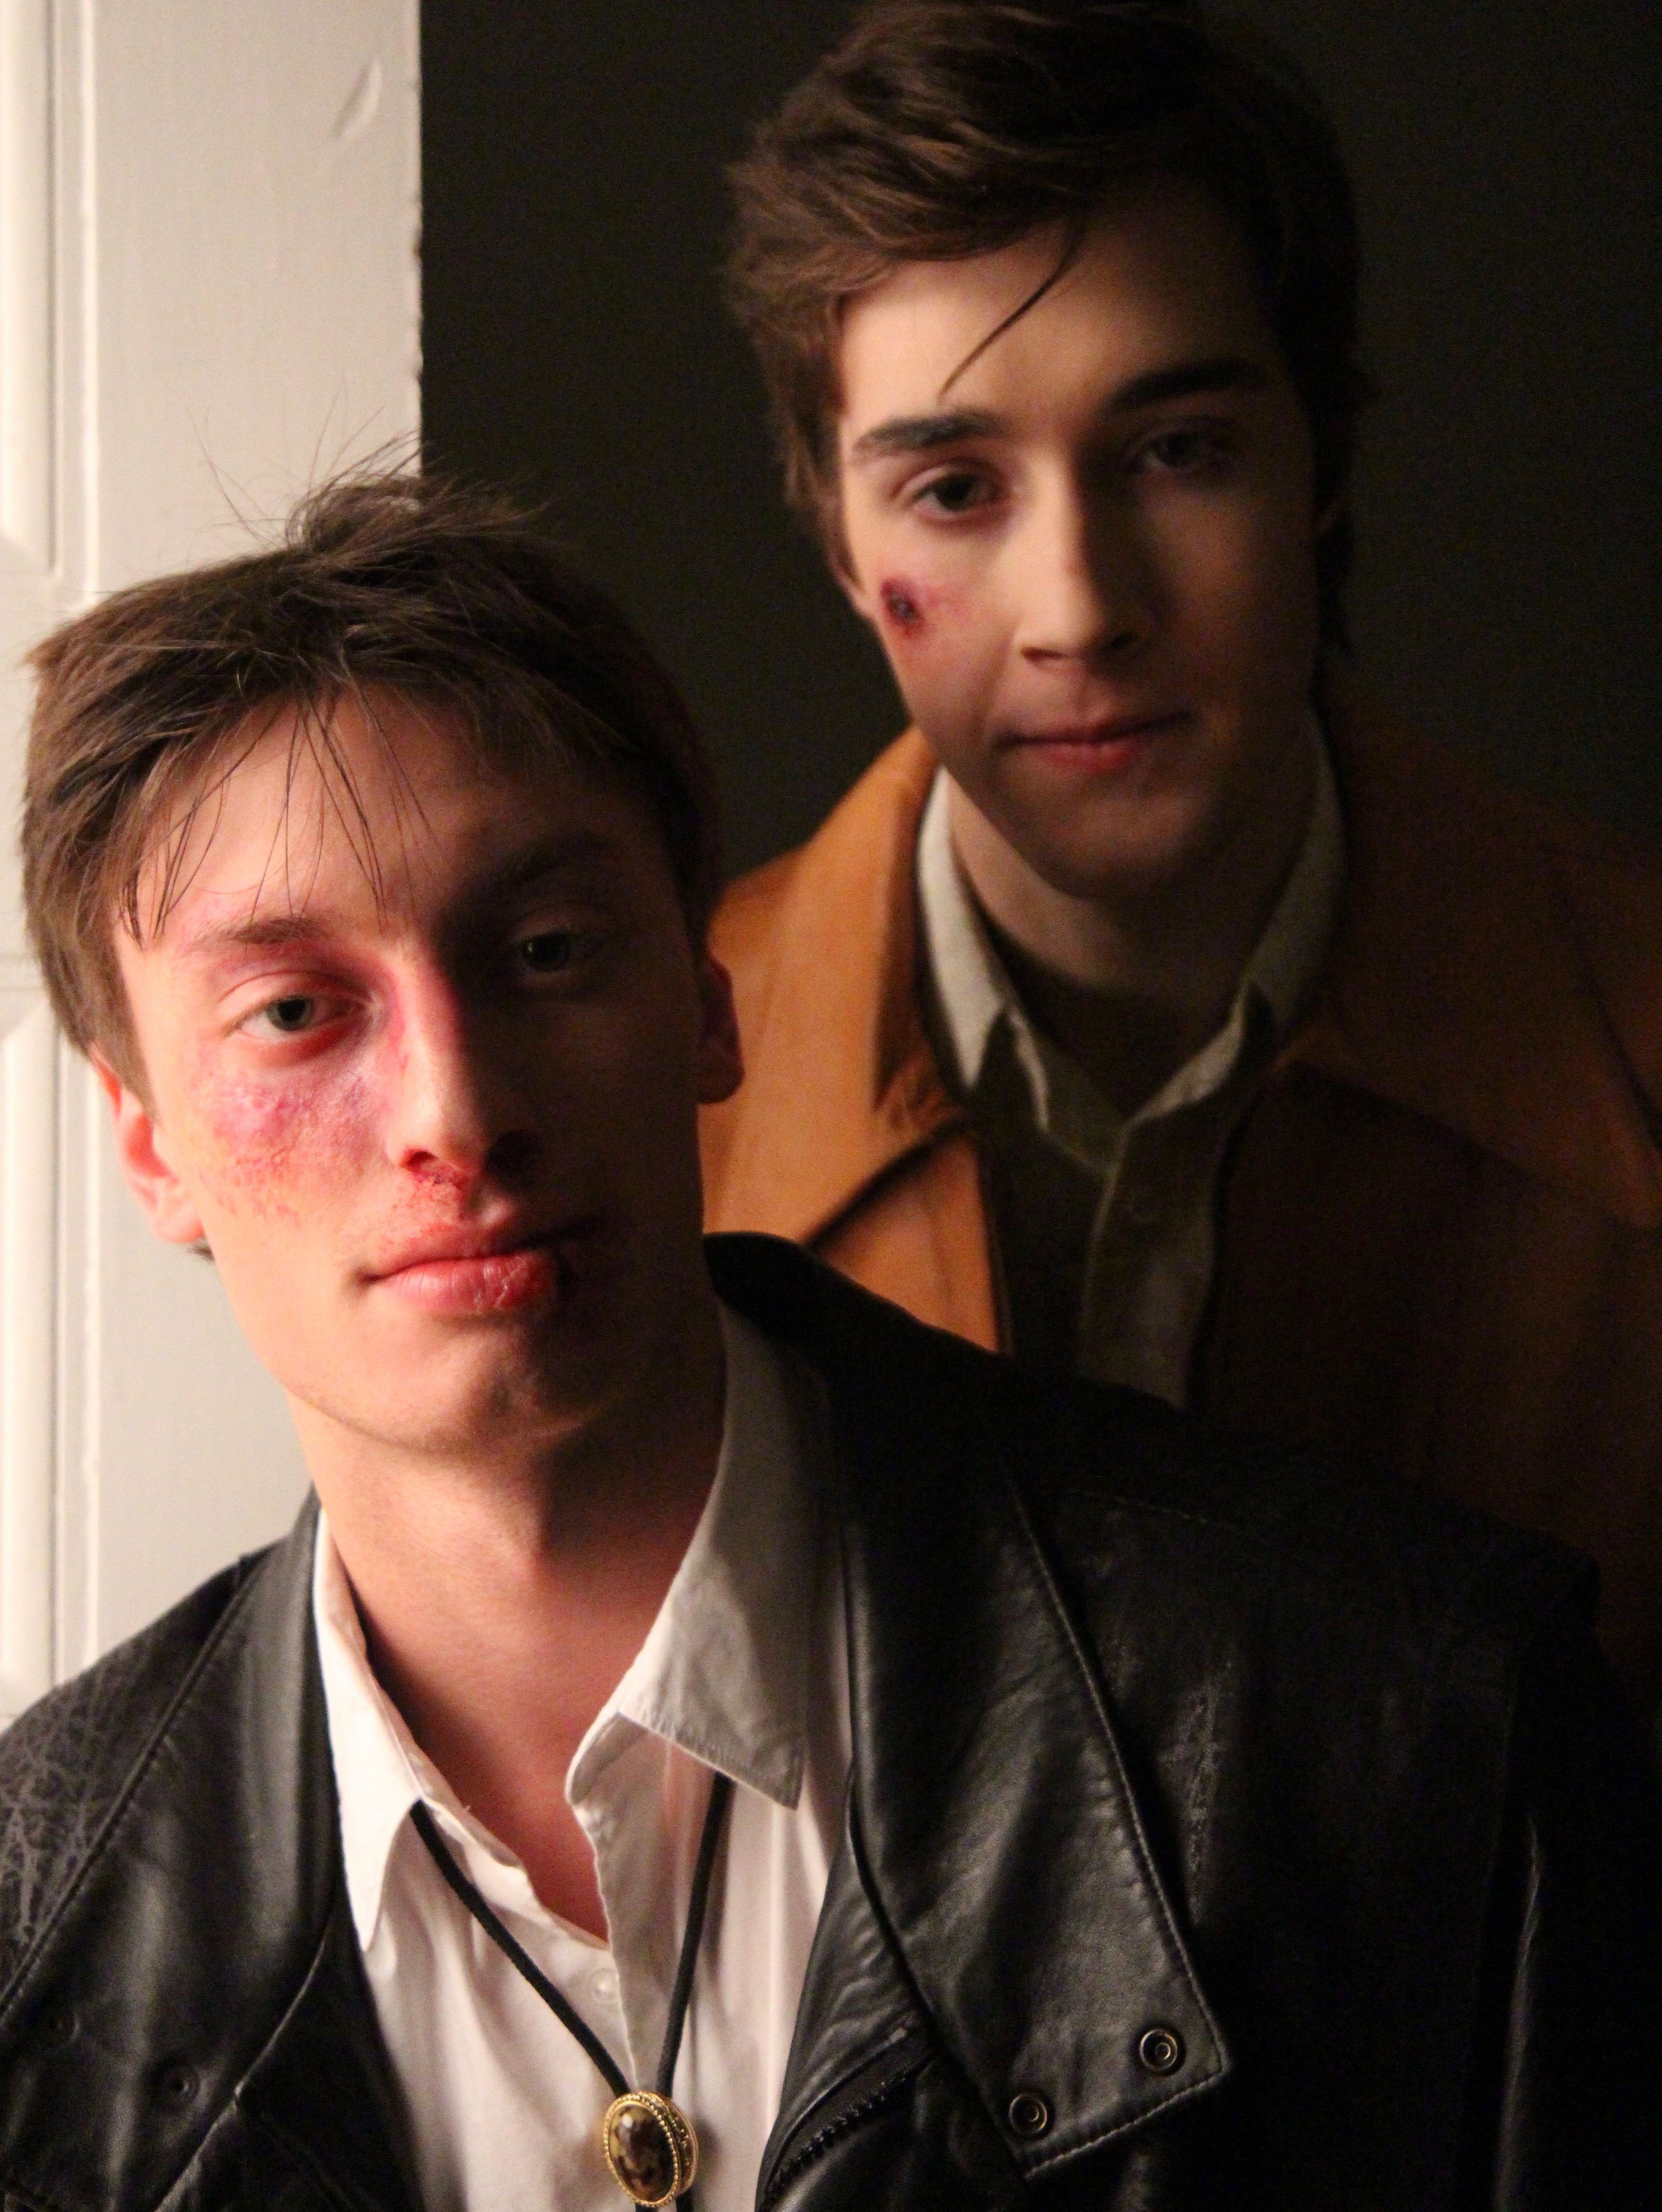 Aris Tyros (left) and Eric Osborne (right) looking beat up on the set of 